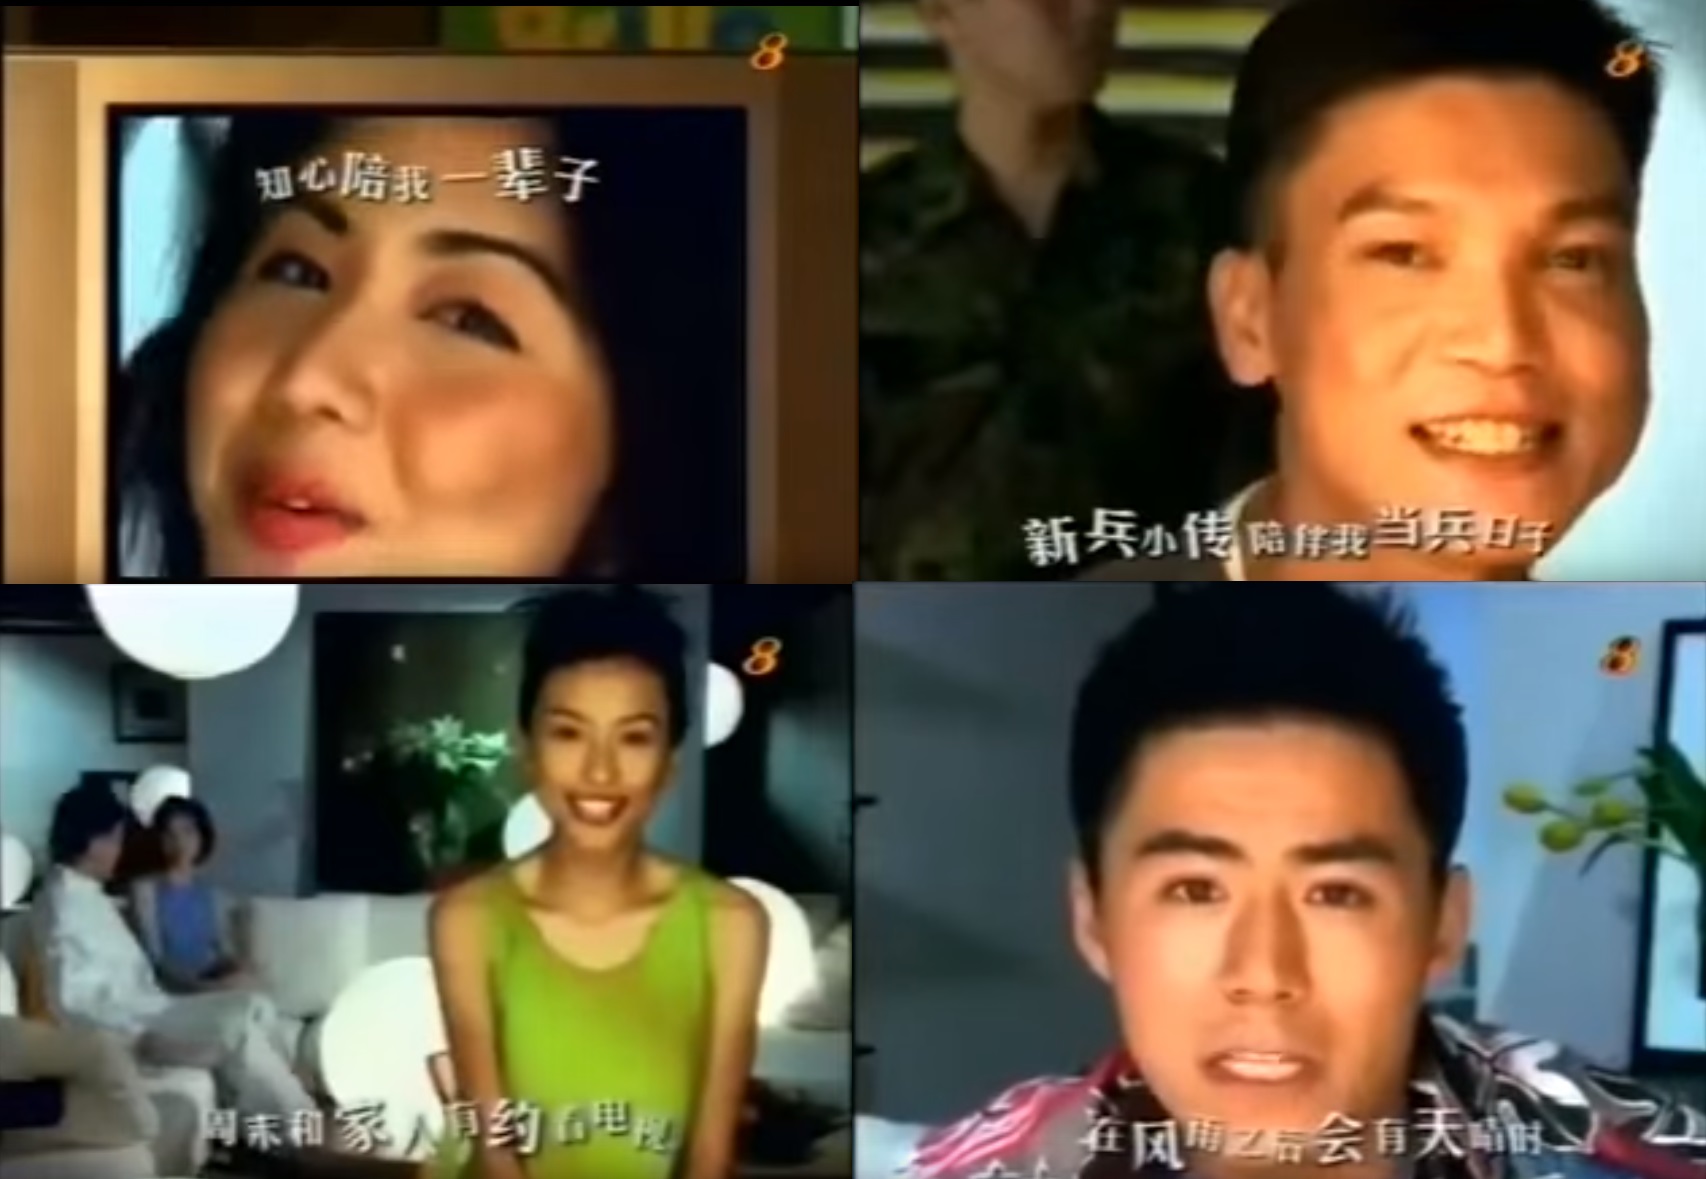 Clockwise from top left: Evelyn Tan, Xie Shaoguang, Lu Feng, Ann Kok